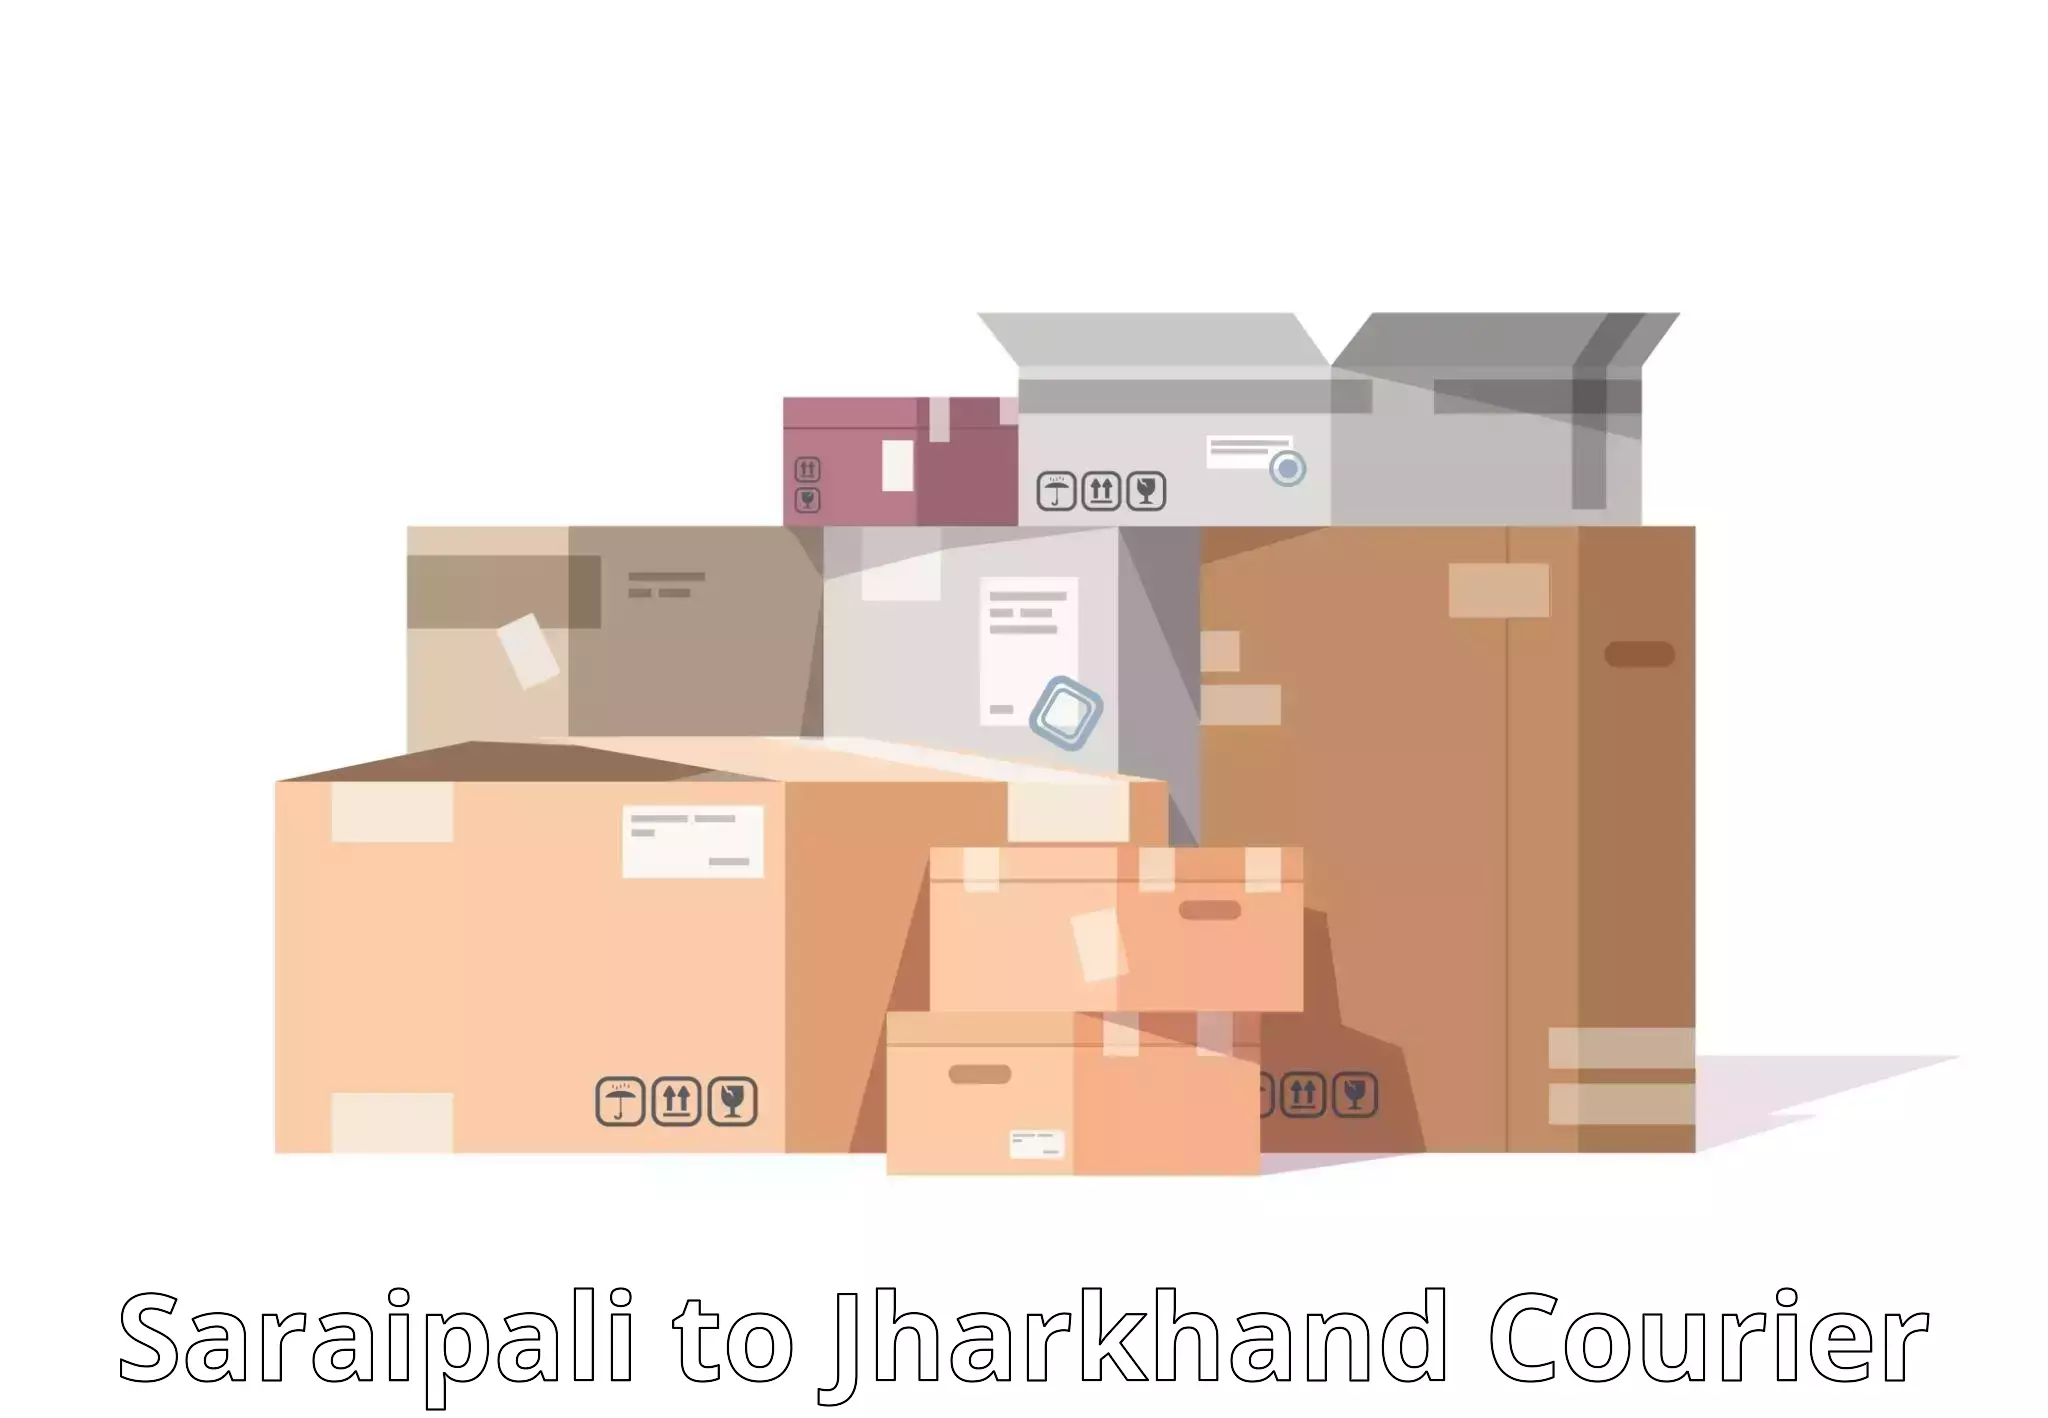 24-hour delivery options in Saraipali to Ormanjhi